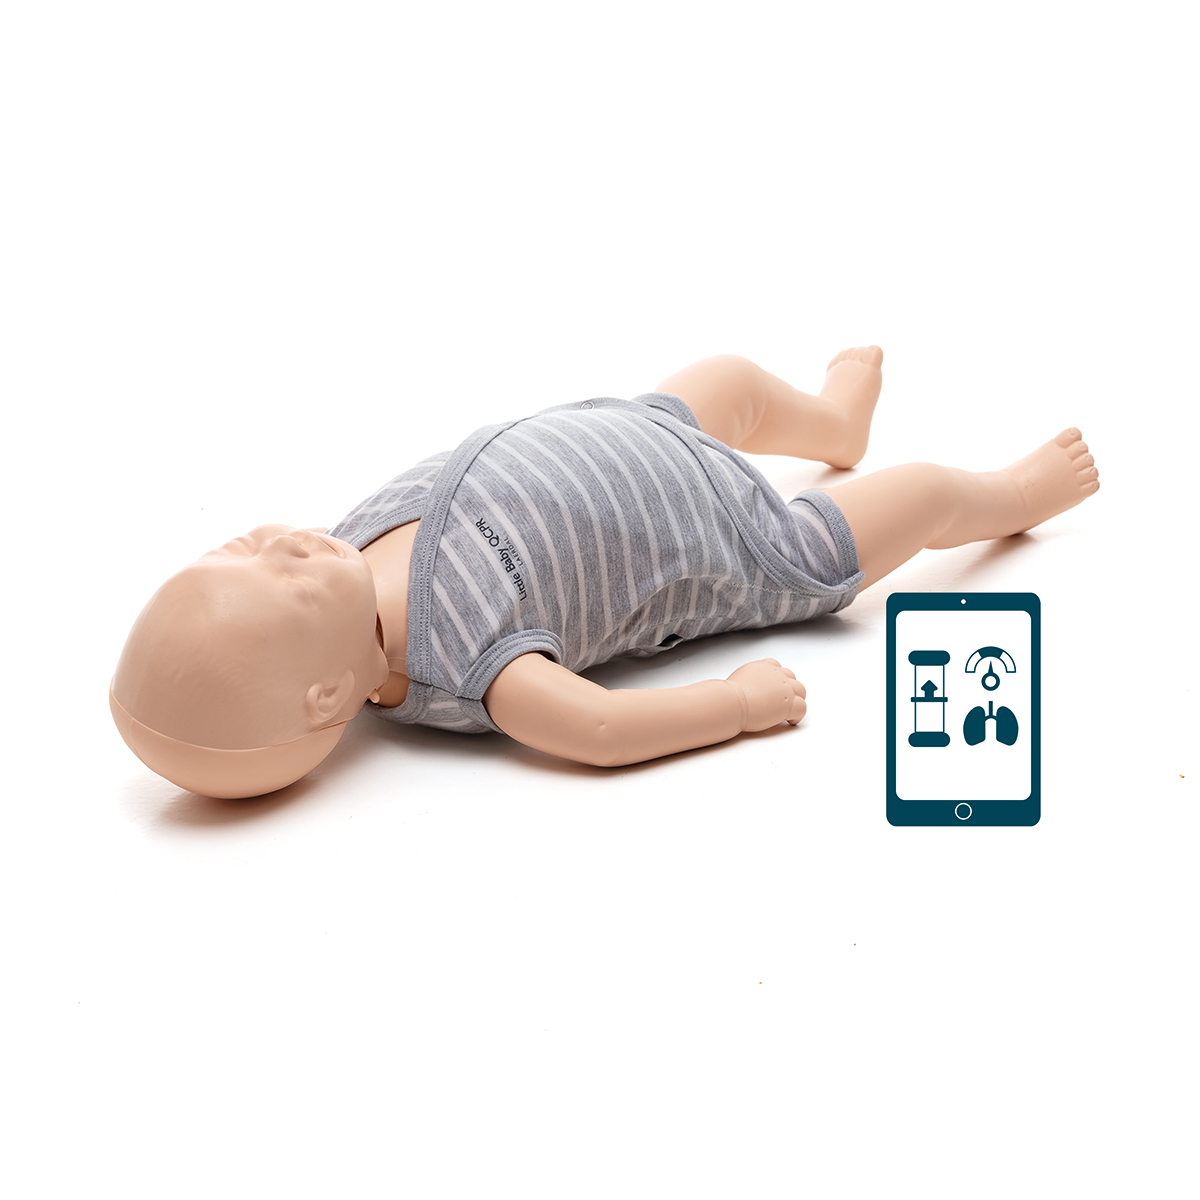 Realistic, durable and affordable light skin infant training manikin with QCPR technology